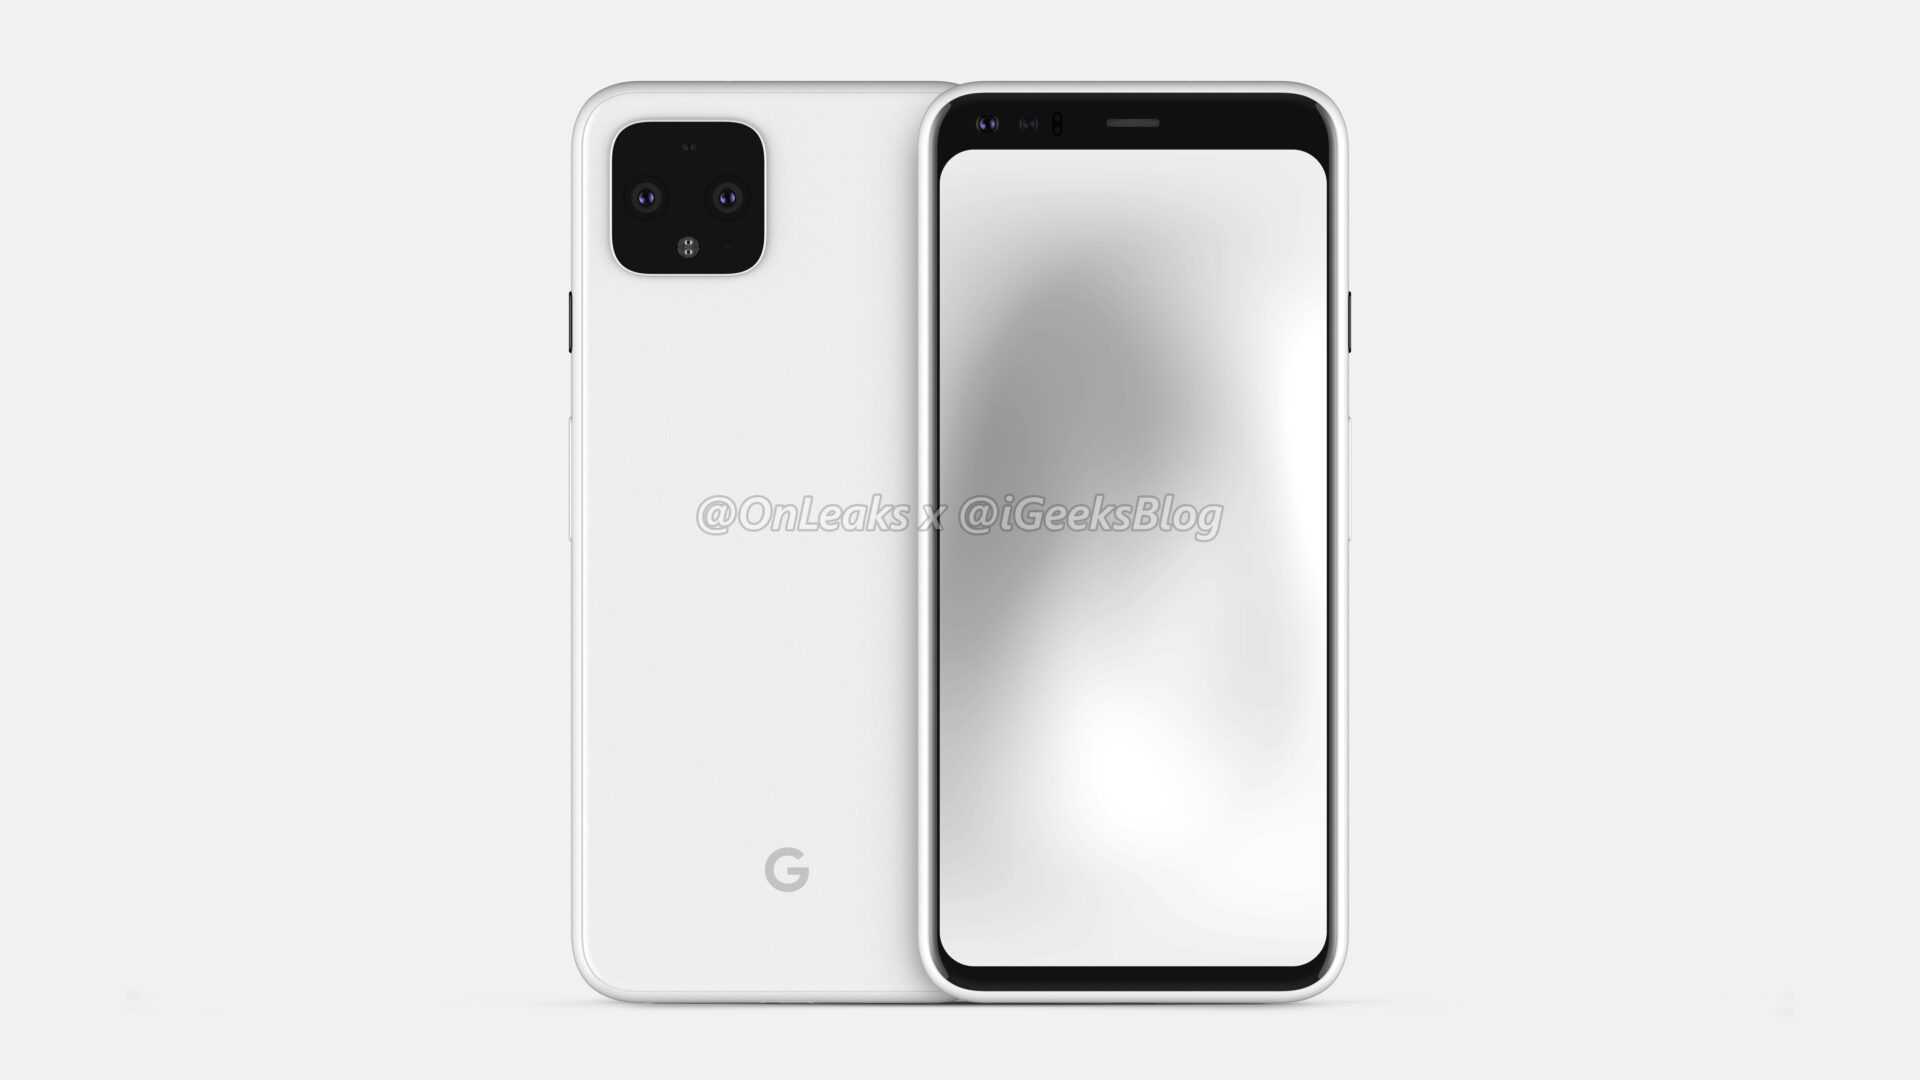 Renders of Google Pixel 4 shows the upcoming flagship smartphone in its glory